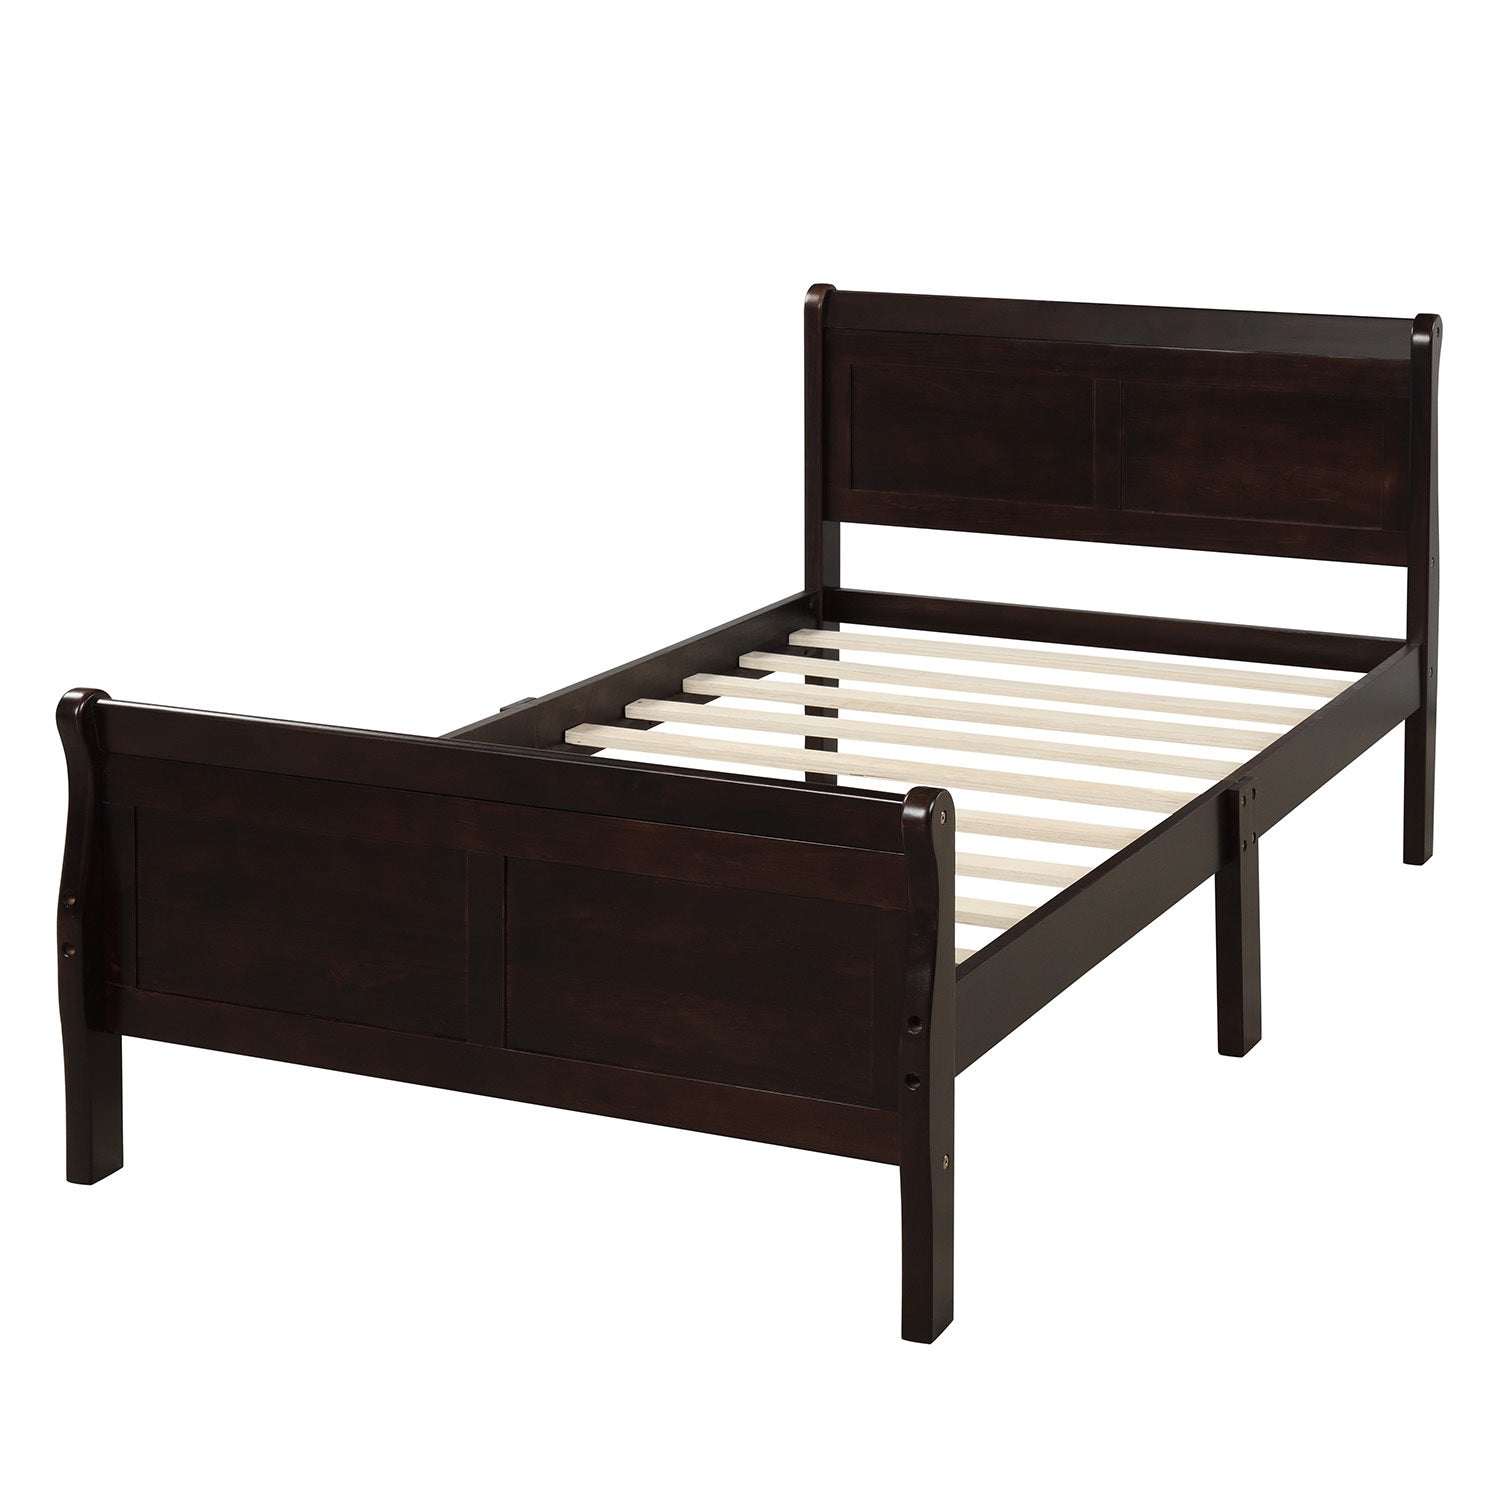 Wood Platform Twin Bed Frame - Sleigh Design with Headboard/Footboard - Sturdy Mattress Foundation with Wood Slat Support